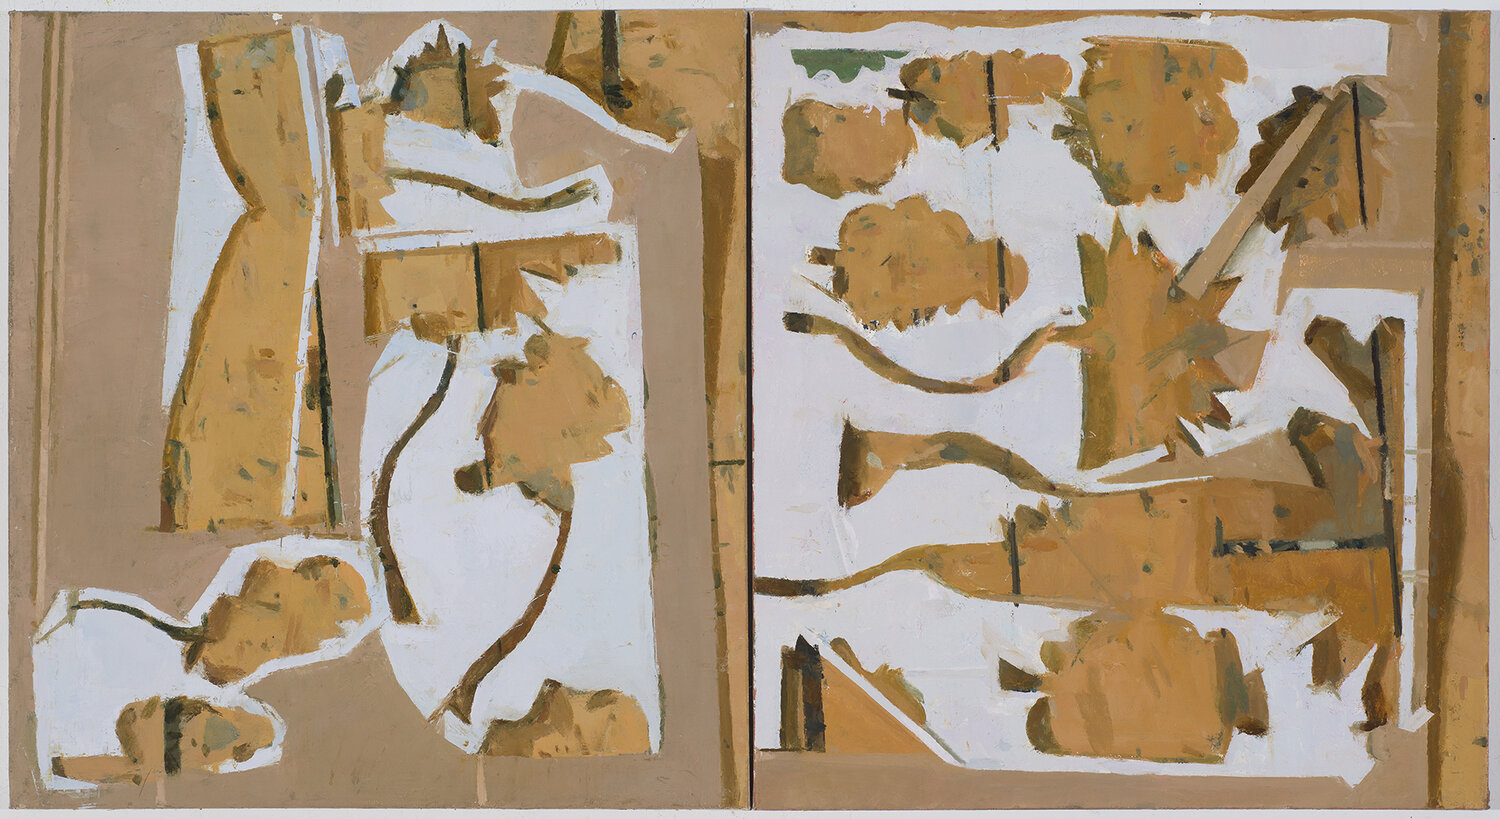  missing trees, 2014 oil on linen 22 x 40 in (two panels)    